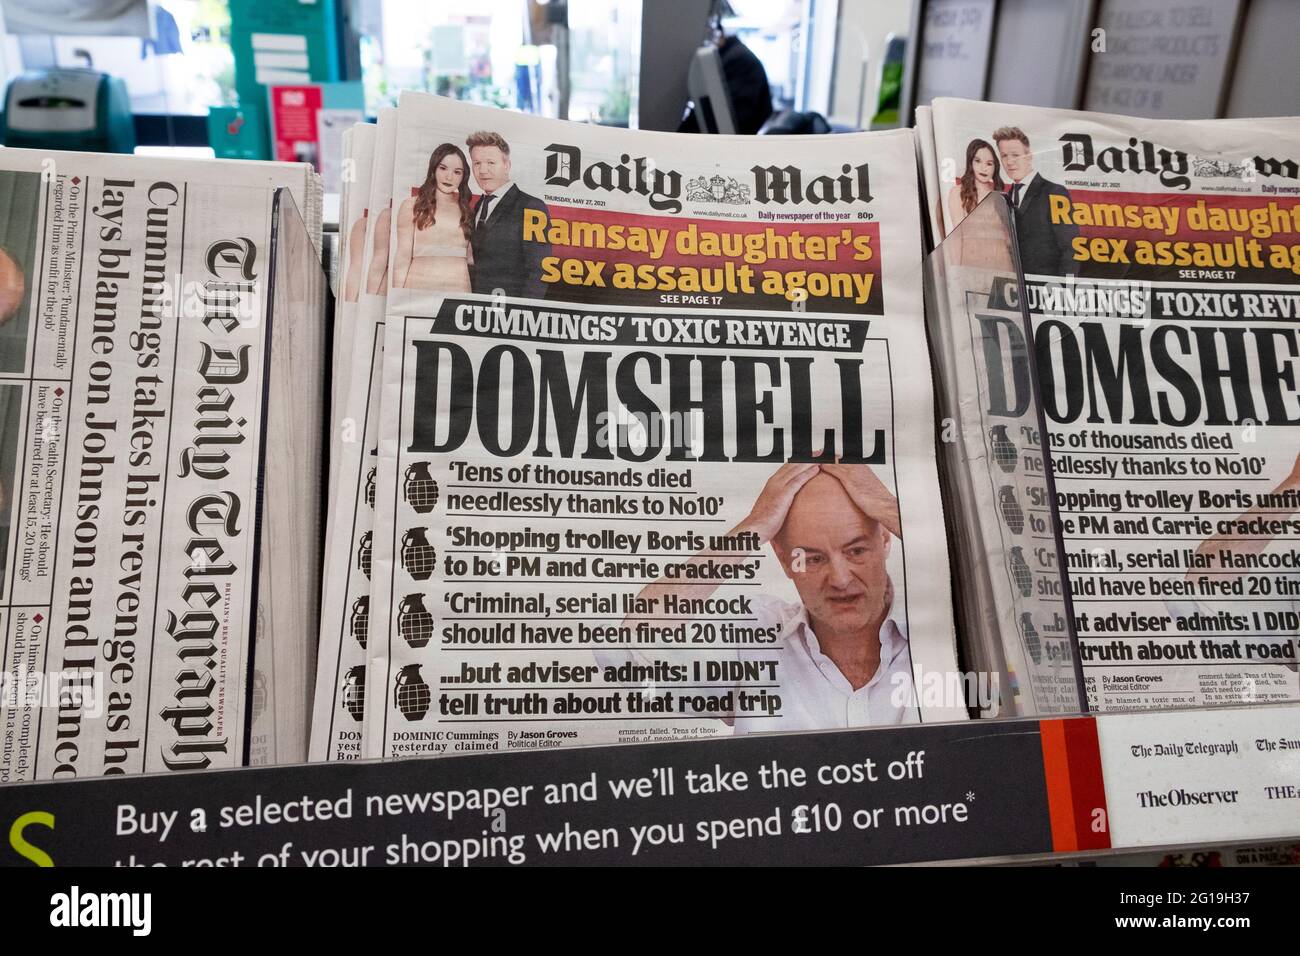 'Cummings Toxic Revenge'  Domshell on Boris Johnson and Matt Hancock in Daily Mail front page headline on 27 May 2021 in London England UK Stock Photo